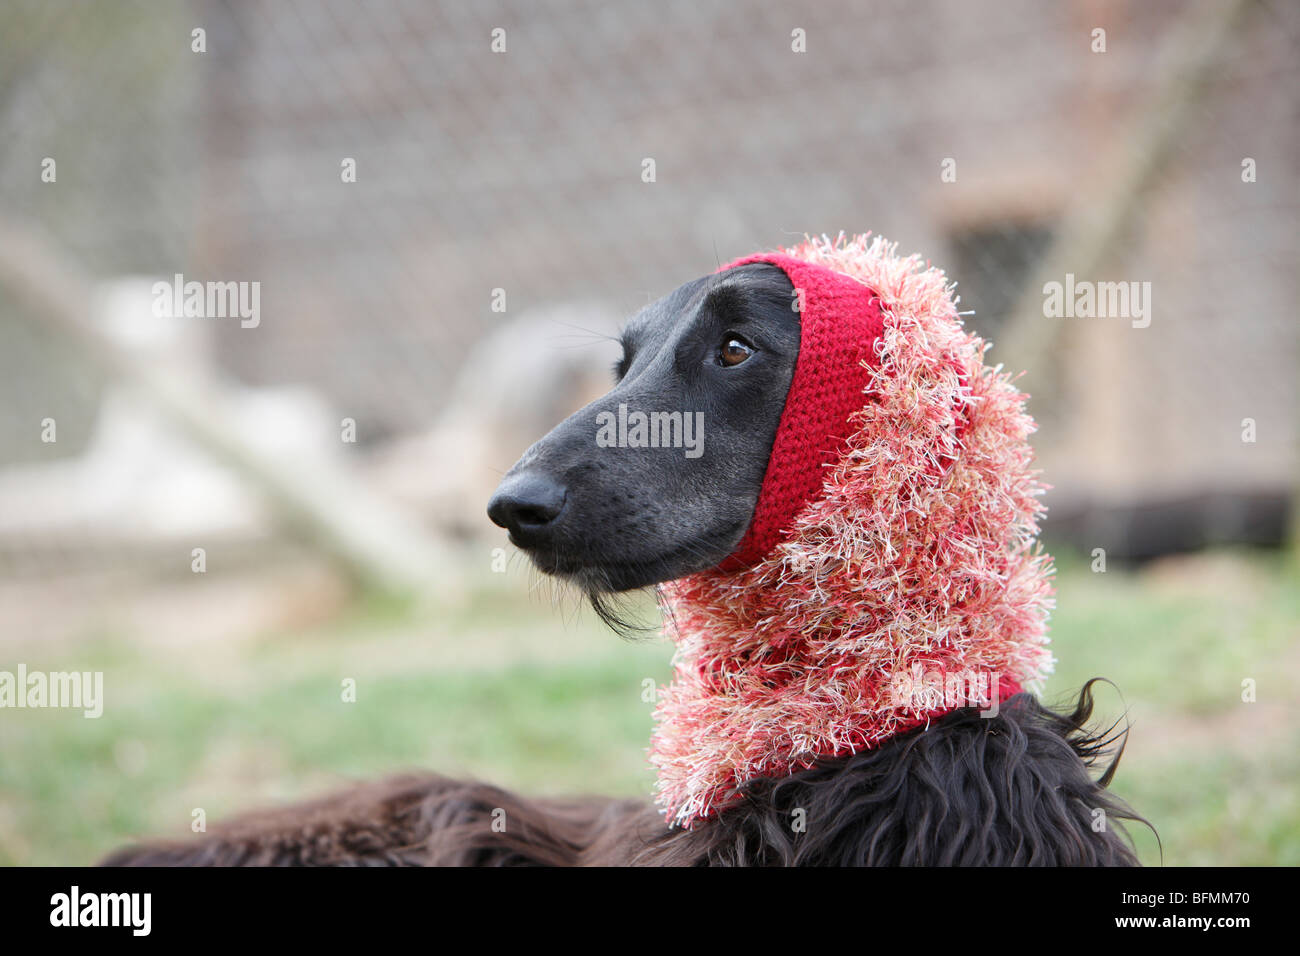 Afghanistan Hound, Afghan Hound (Canis lupus f. familiaris), portait with eating cap, Germany Stock Photo